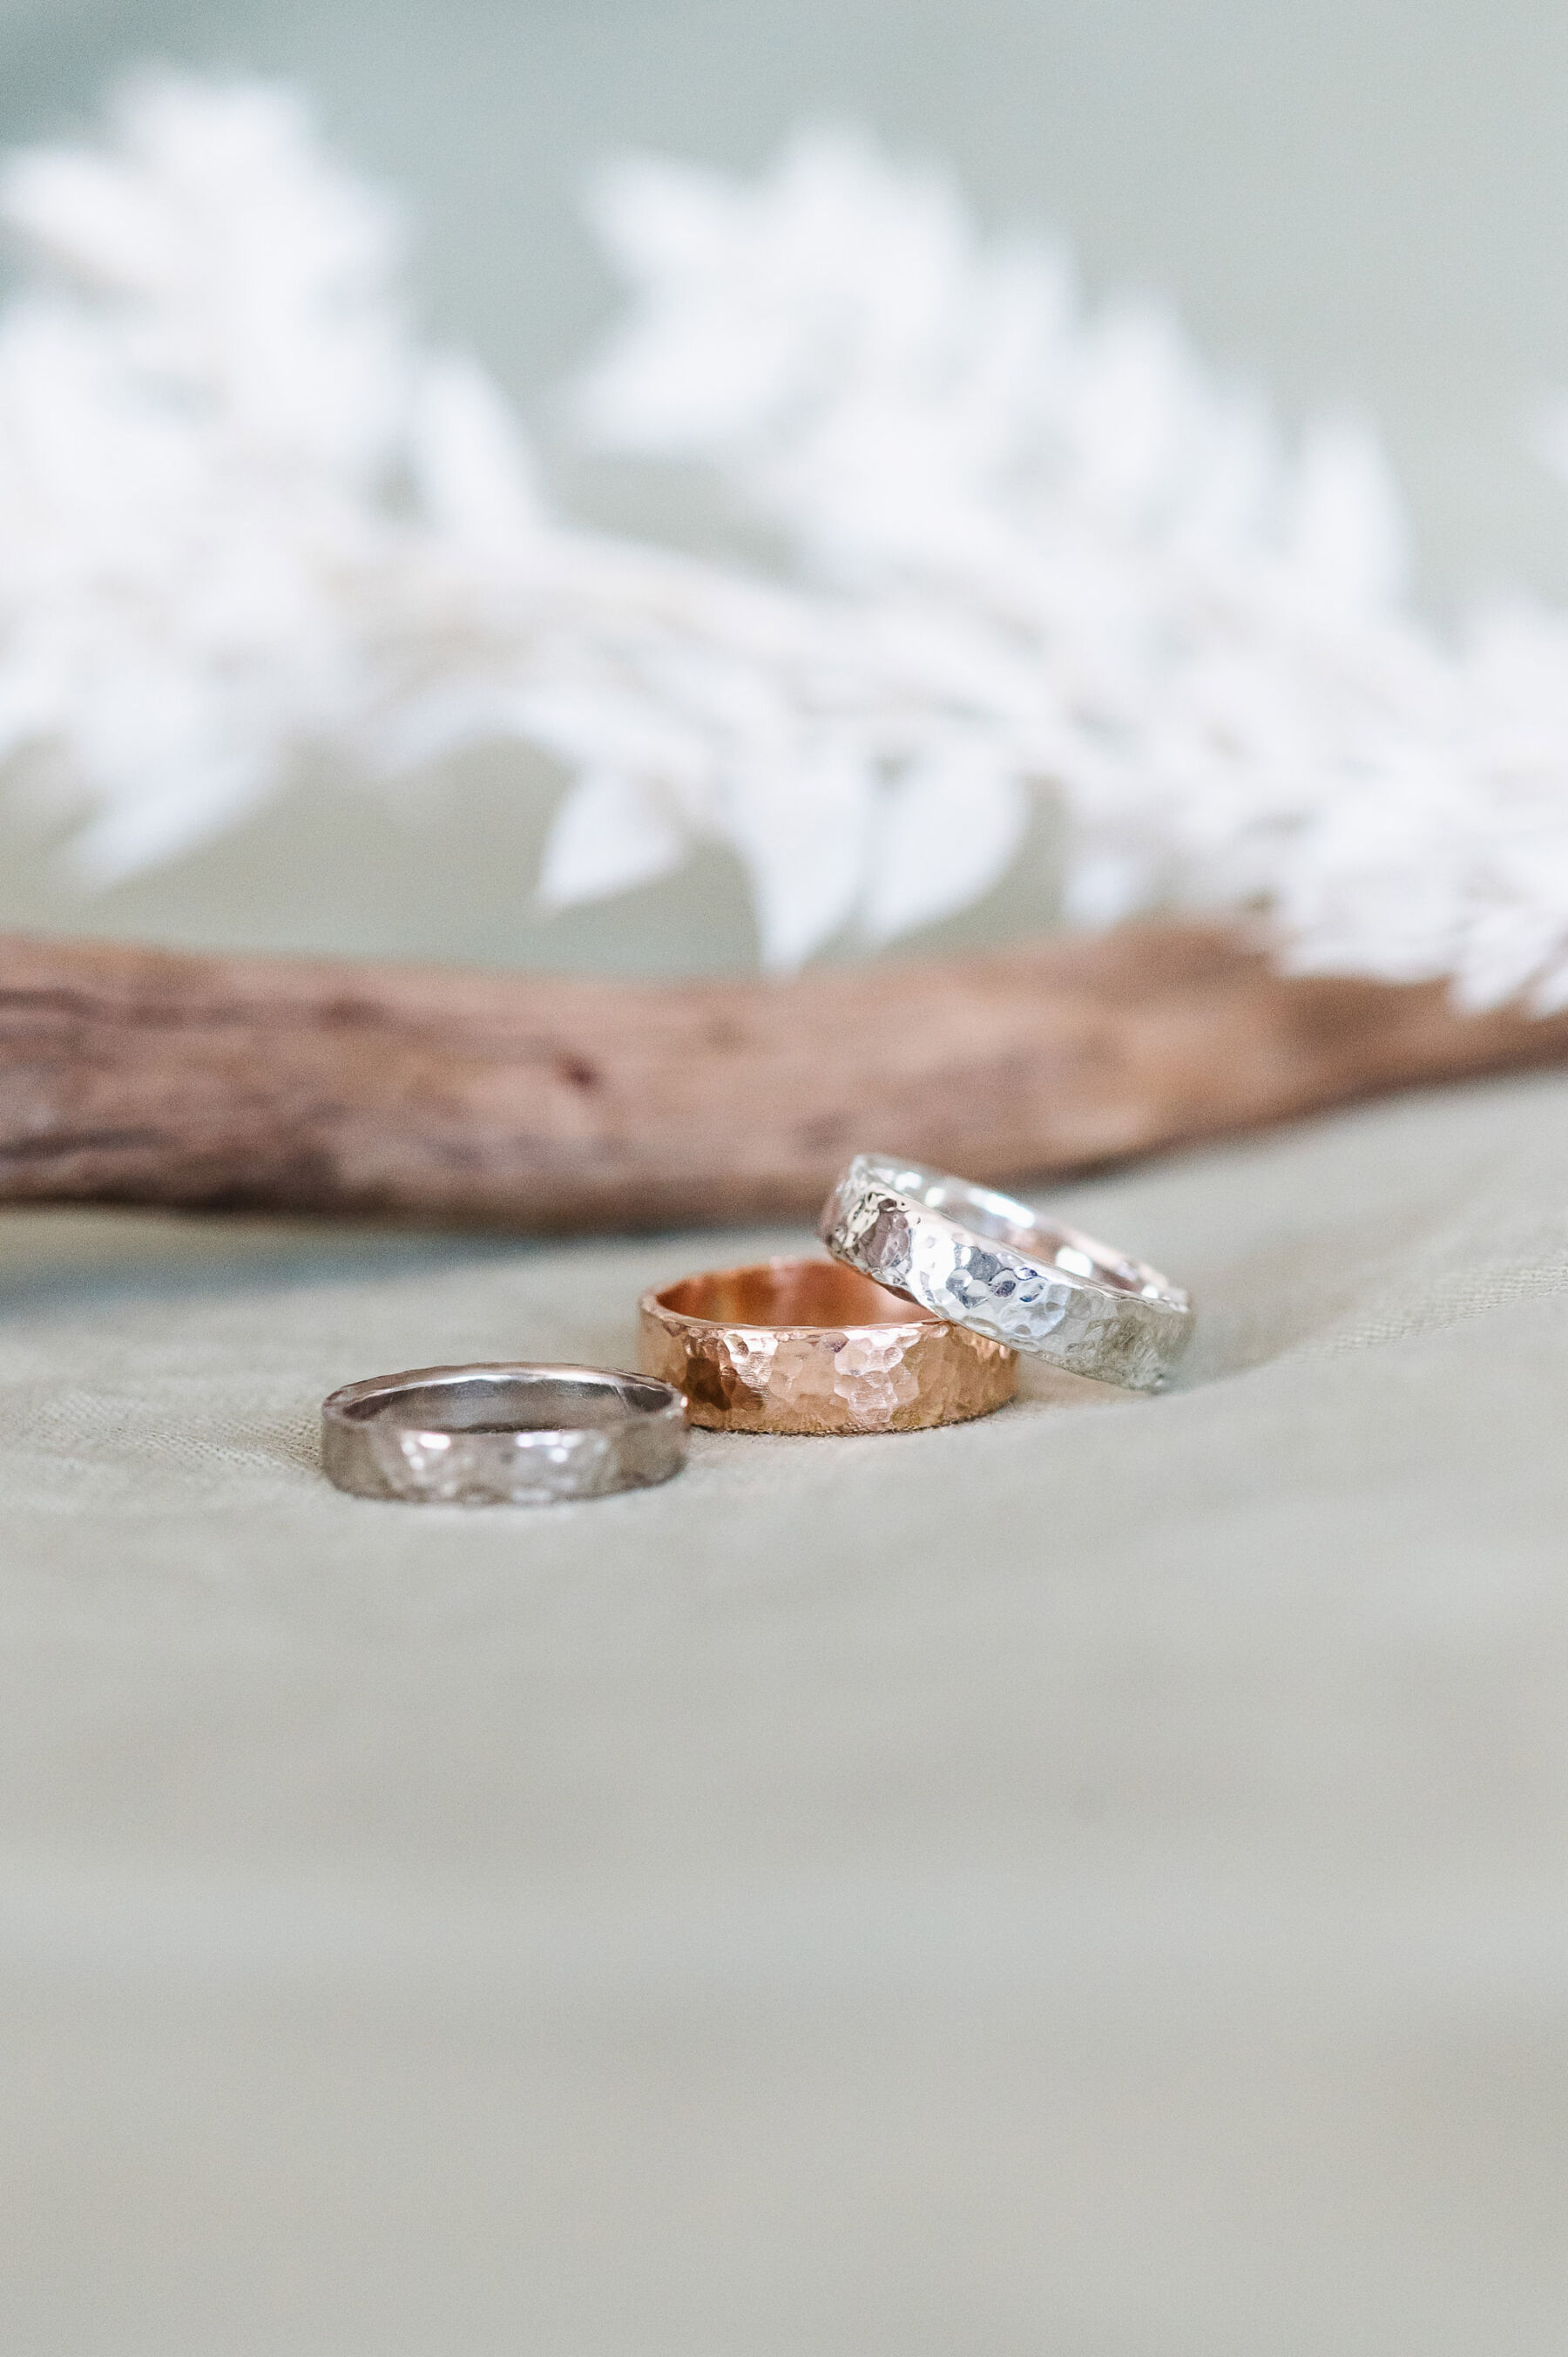 Ethical fairtrade gold and silver wedding bands by Nikki Stark Jewellery